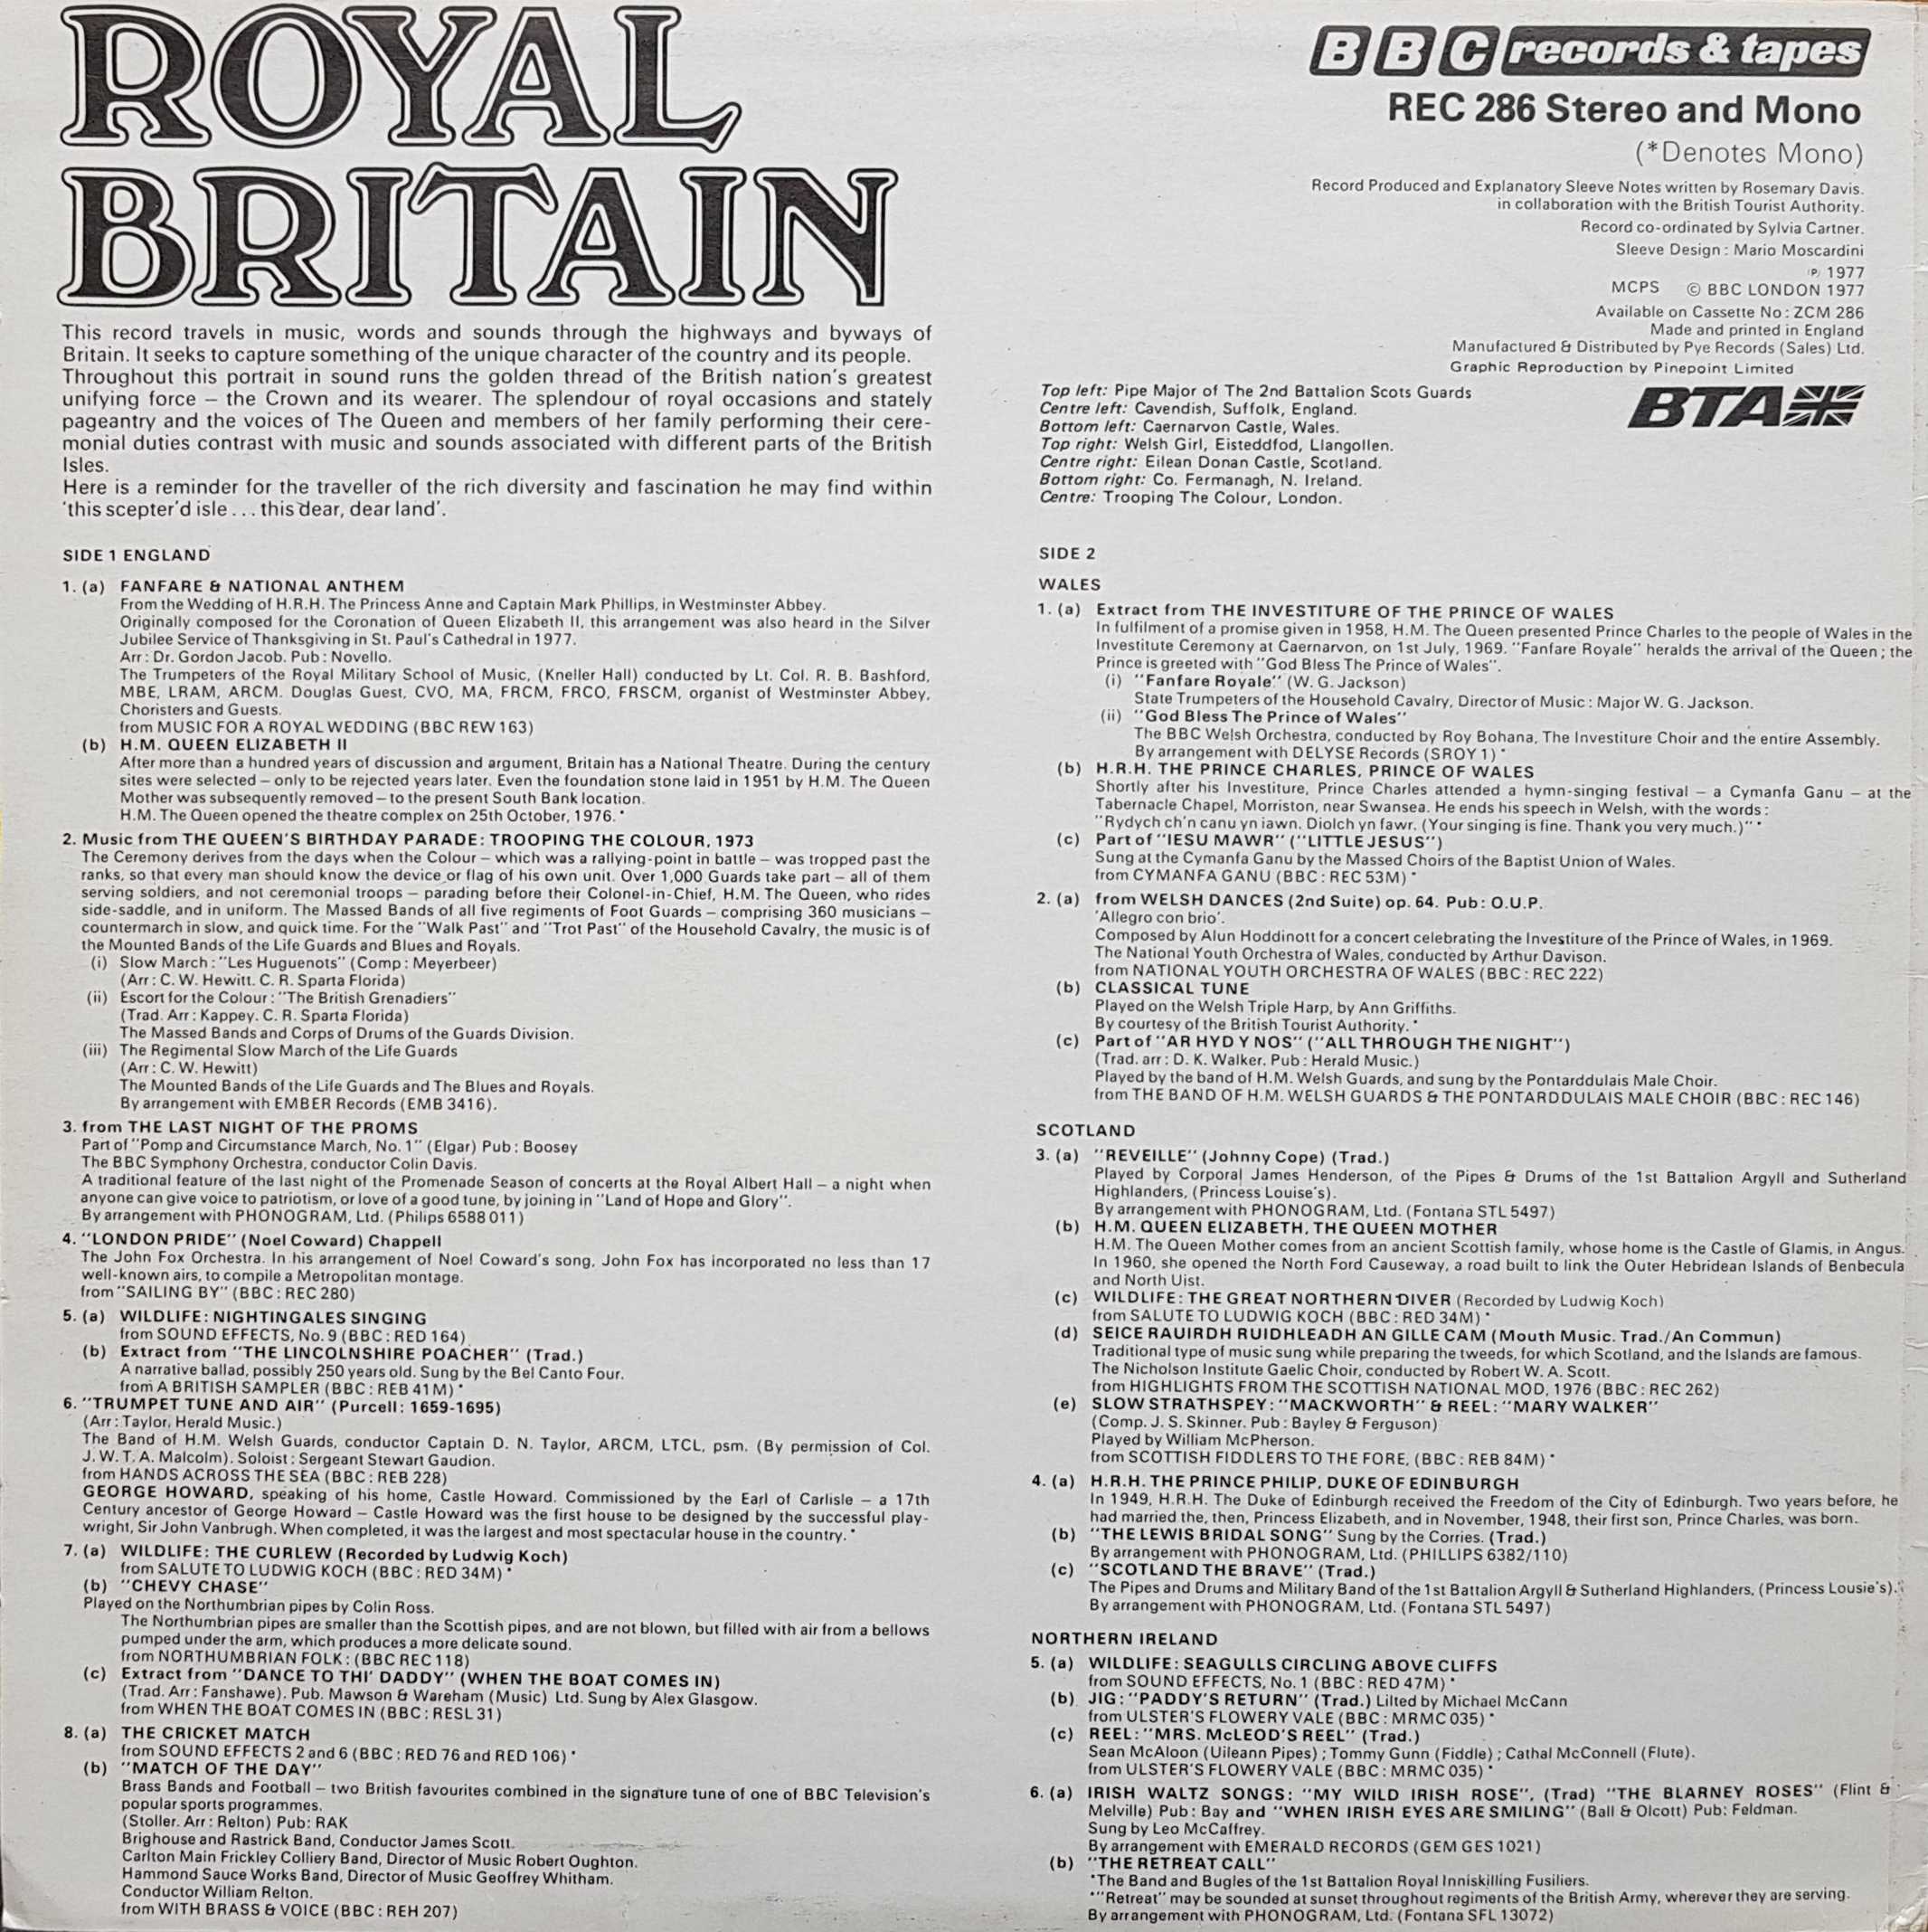 Picture of REC 286 Royal Britain - A journey in sound through the Queens realm by artist Various from the BBC records and Tapes library